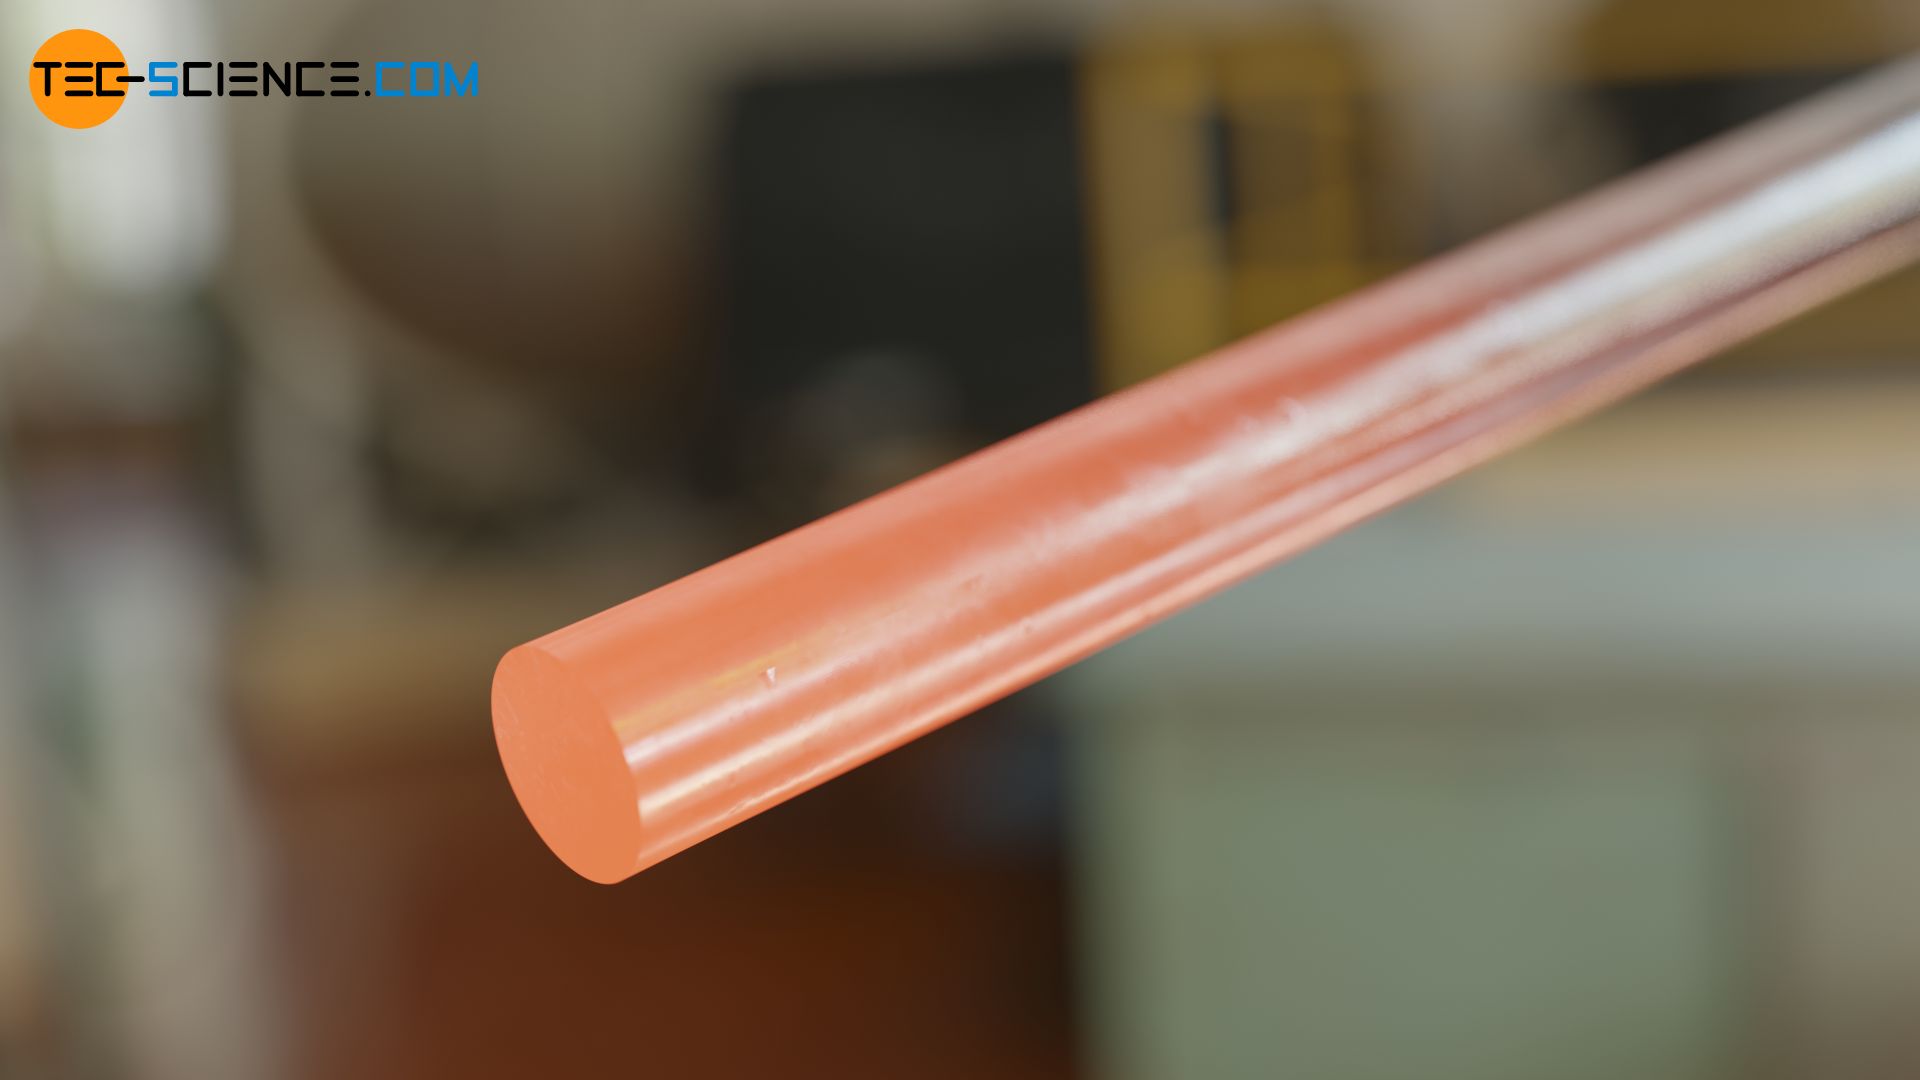 Visible radiation of a glowing steel rod